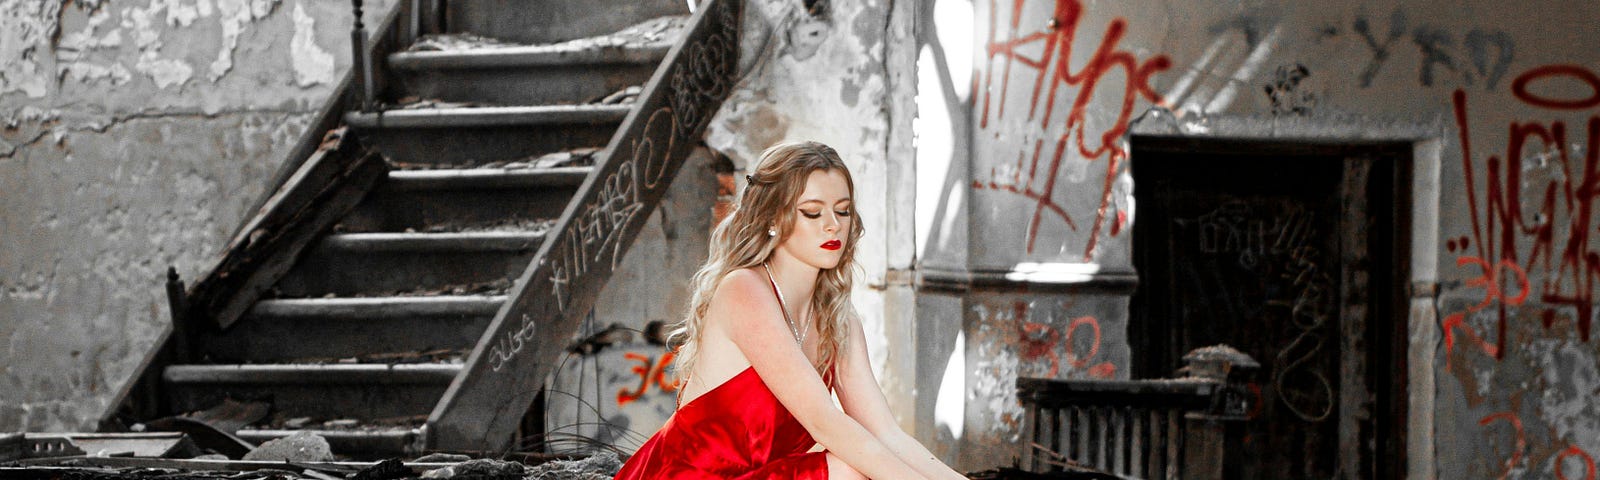 A woman in a red dress is sitting on the stairs of an abandoned building. She’s holding a crown while casting her gaze downward.